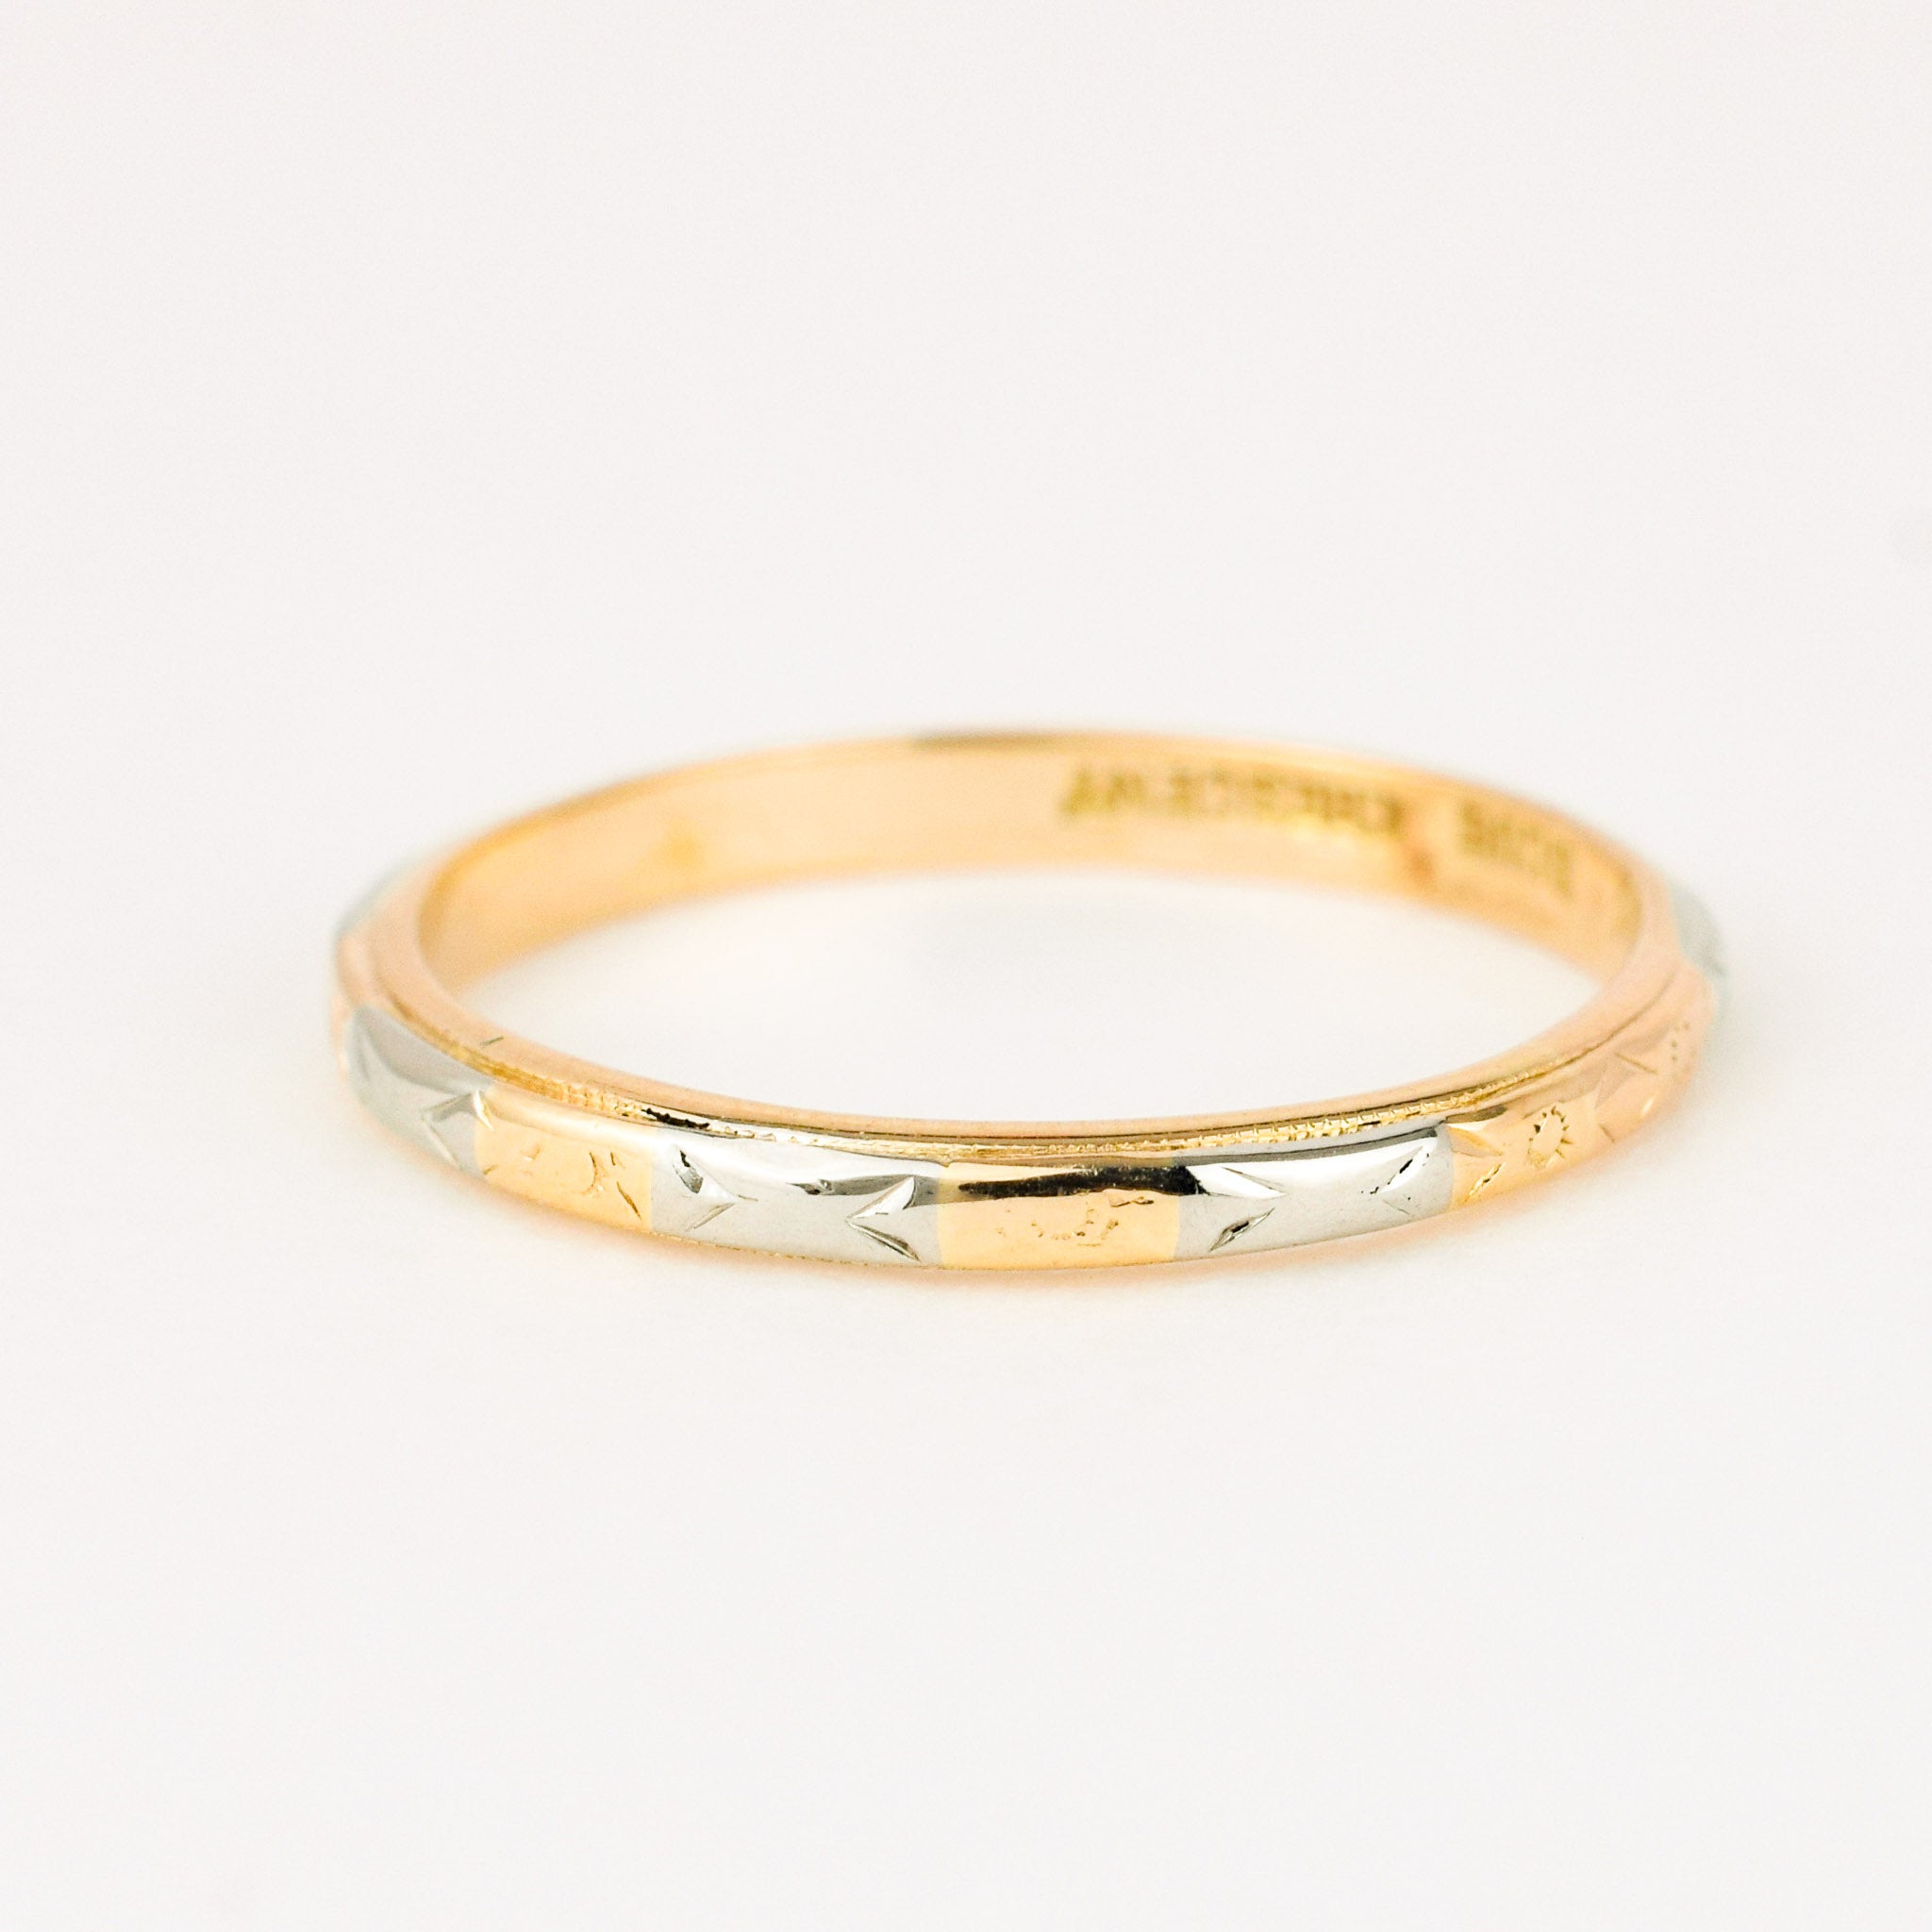 vintage gold intricate two-toned wedding band